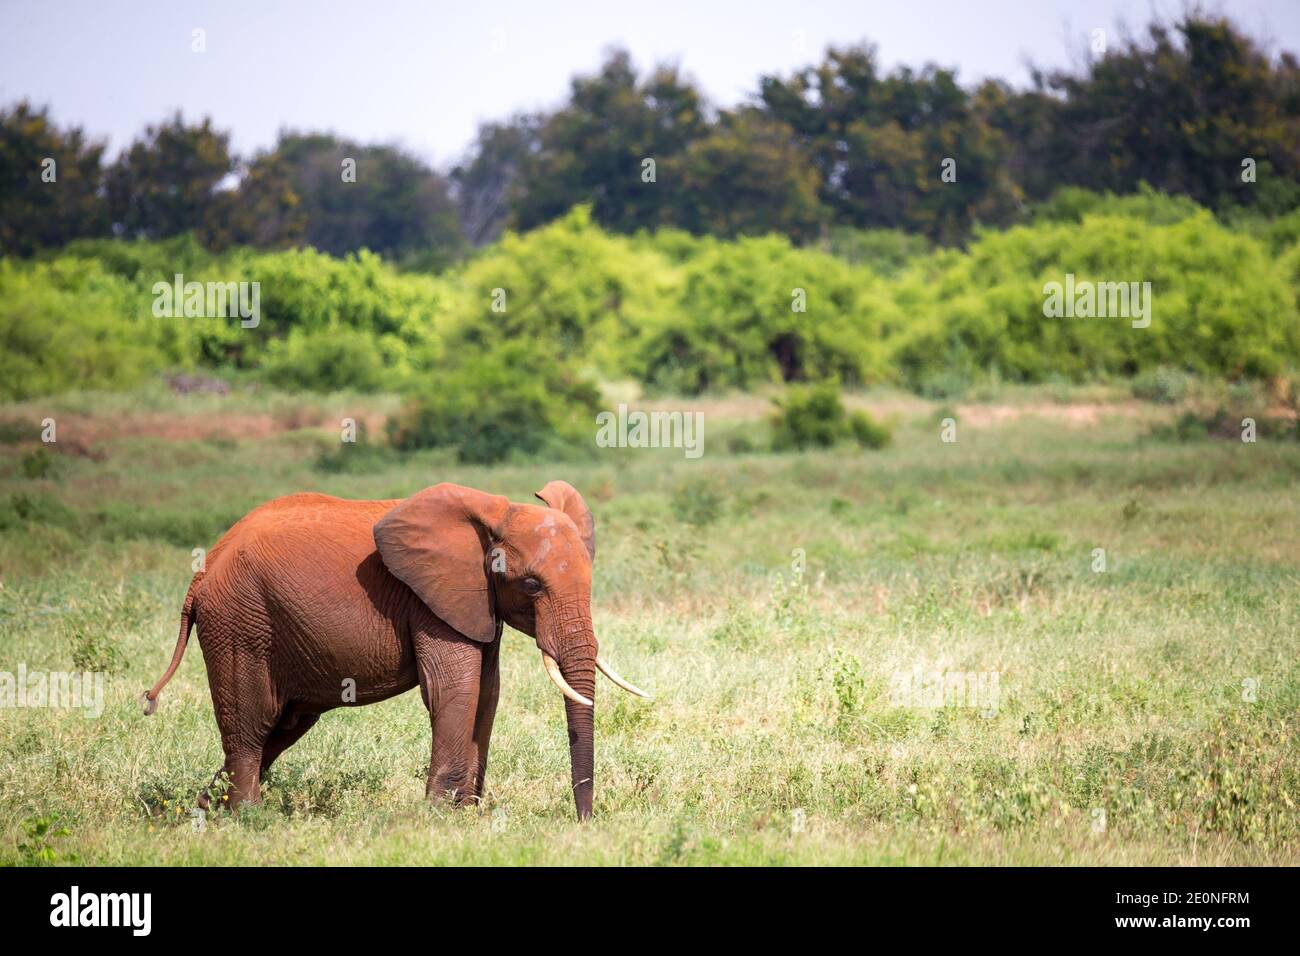 One red elephant is standing in the grassland. Stock Photo